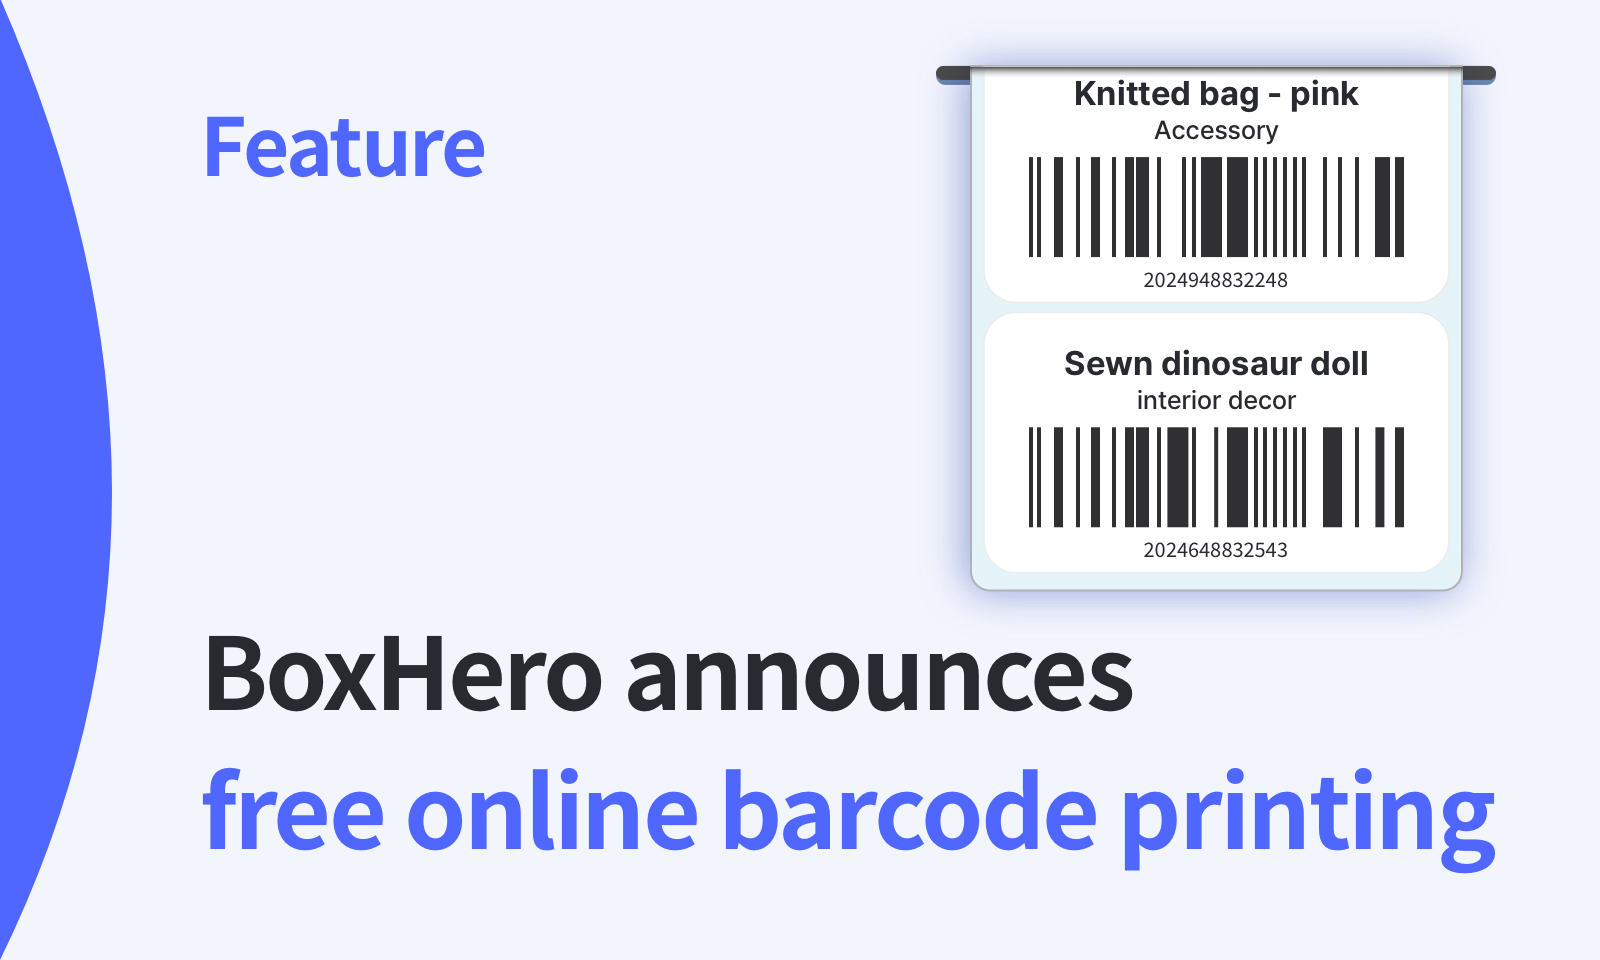 BoxHero announces free online barcode printing. Here's how to use it!